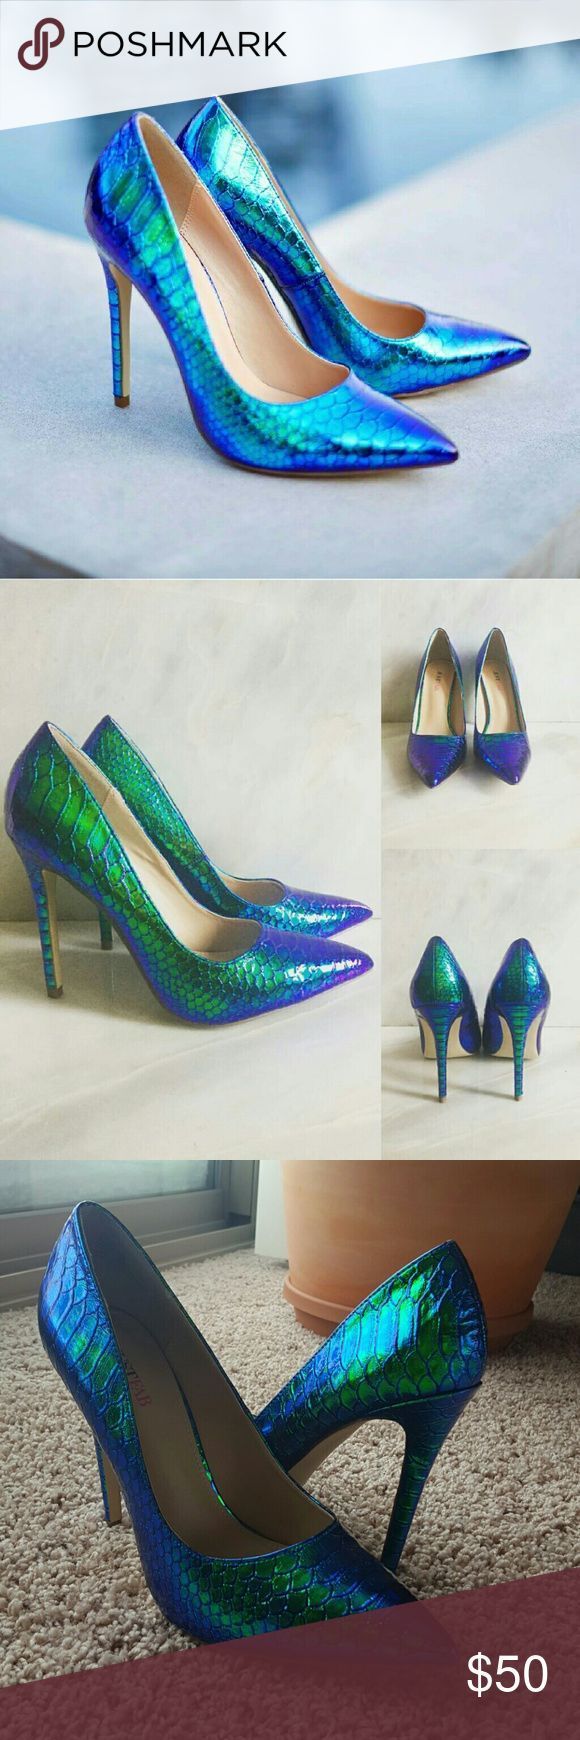 Brand New! Mermaid Shoes! Something different. This is an eye catching style that wont be forgotten. Featuring a trendy iridescent